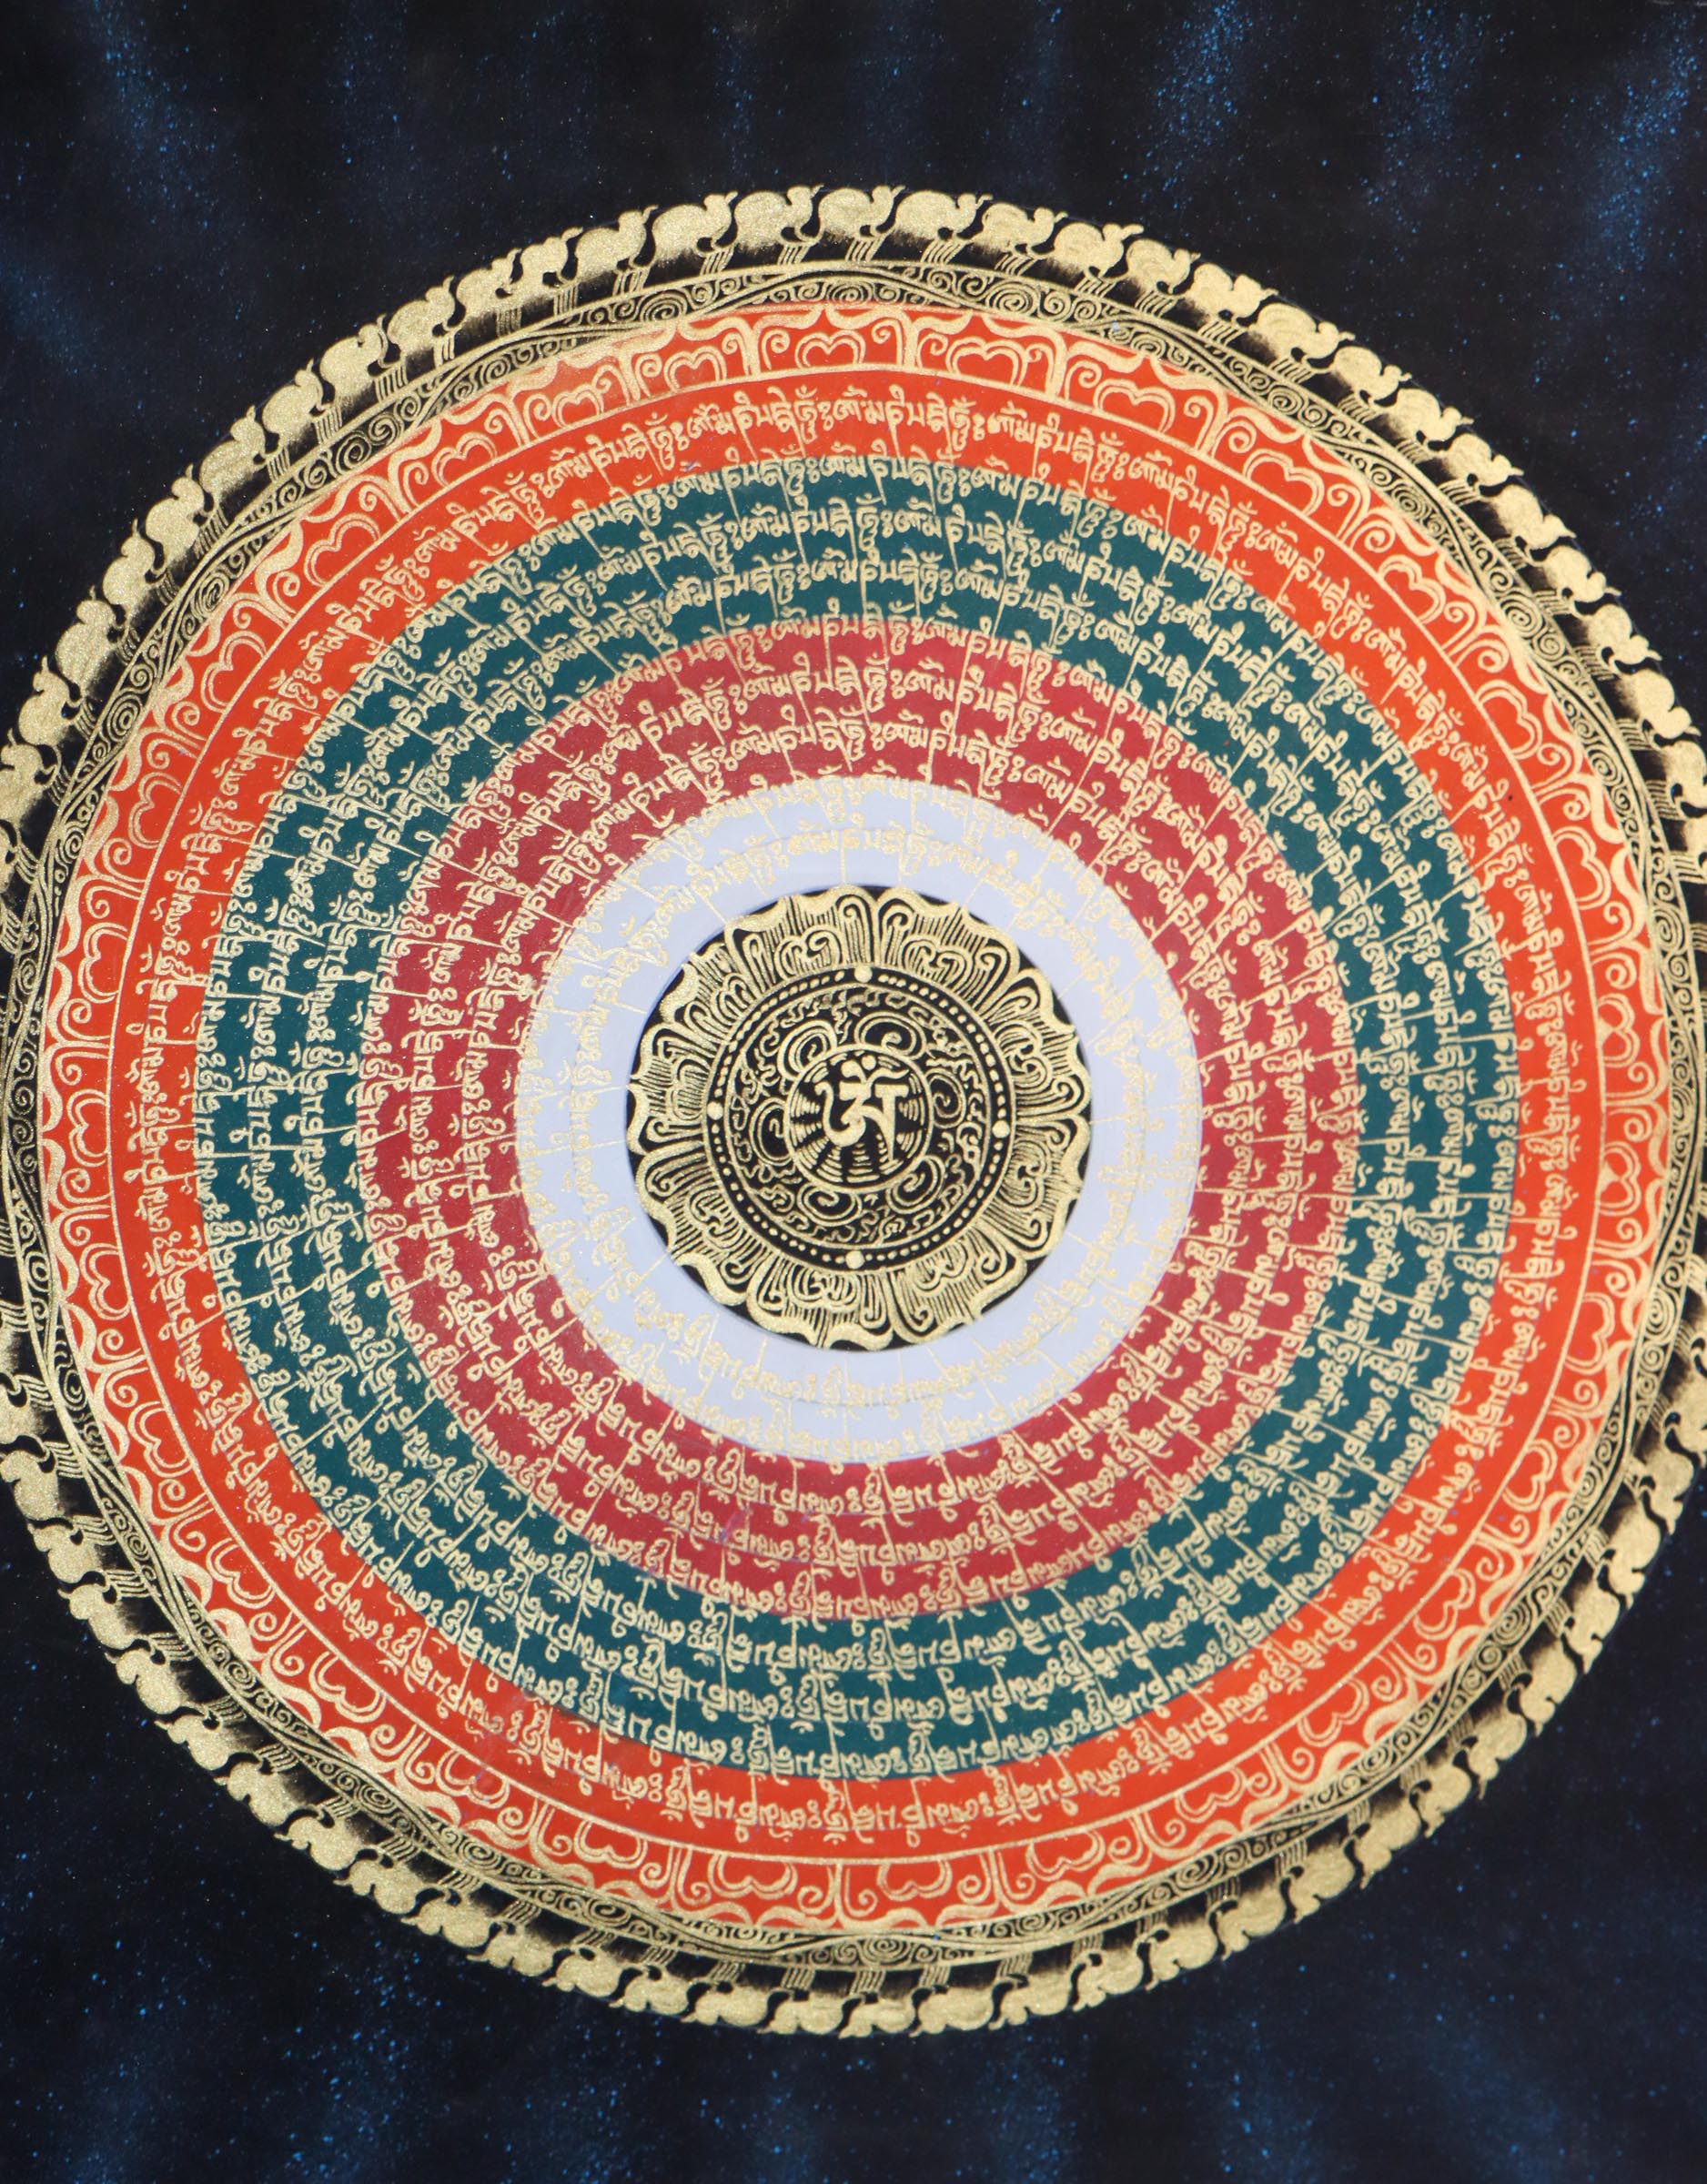 Mantra Mandala Thangka Painting is skillfully crafted using traditional techniques.